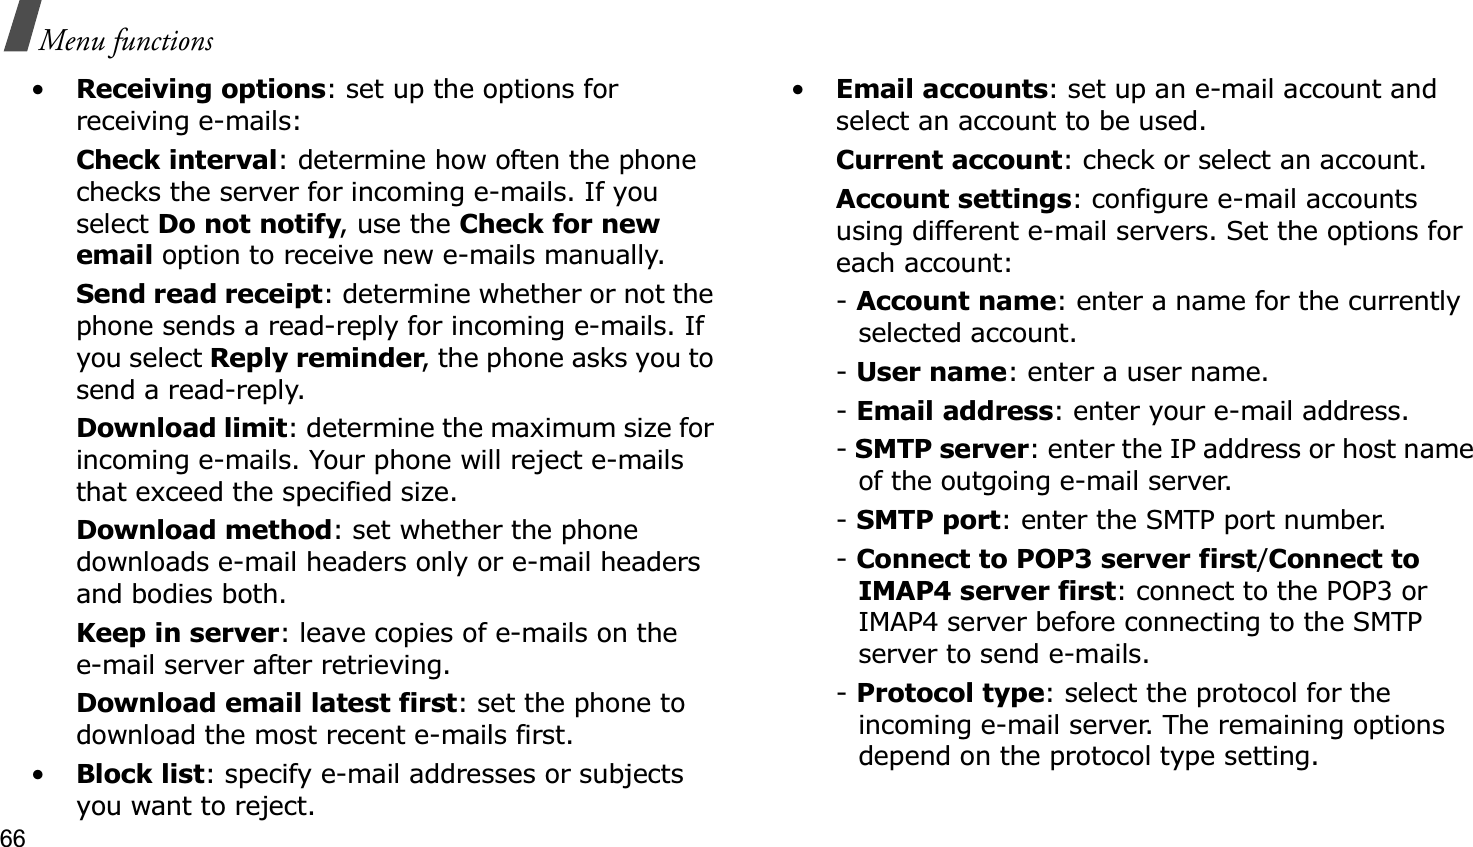 66Menu functions•Receiving options: set up the options for receiving e-mails:Check interval: determine how often the phone checks the server for incoming e-mails. If you select Do not notify, use the Check for new email option to receive new e-mails manually.Send read receipt: determine whether or not the phone sends a read-reply for incoming e-mails. If you select Reply reminder, the phone asks you to send a read-reply.Download limit: determine the maximum size for incoming e-mails. Your phone will reject e-mails that exceed the specified size.Download method: set whether the phone downloads e-mail headers only or e-mail headers and bodies both.Keep in server: leave copies of e-mails on thee-mail server after retrieving.Download email latest first: set the phone to download the most recent e-mails first.•Block list: specify e-mail addresses or subjects you want to reject.•Email accounts: set up an e-mail account and select an account to be used.Current account: check or select an account.Account settings: configure e-mail accounts using different e-mail servers. Set the options for each account:-Account name: enter a name for the currently selected account.-User name: enter a user name.-Email address: enter your e-mail address.-SMTP server: enter the IP address or host name of the outgoing e-mail server.-SMTP port: enter the SMTP port number.-Connect to POP3 server first/Connect to IMAP4 server first: connect to the POP3 or IMAP4 server before connecting to the SMTP server to send e-mails.-Protocol type: select the protocol for the incoming e-mail server. The remaining options depend on the protocol type setting. 